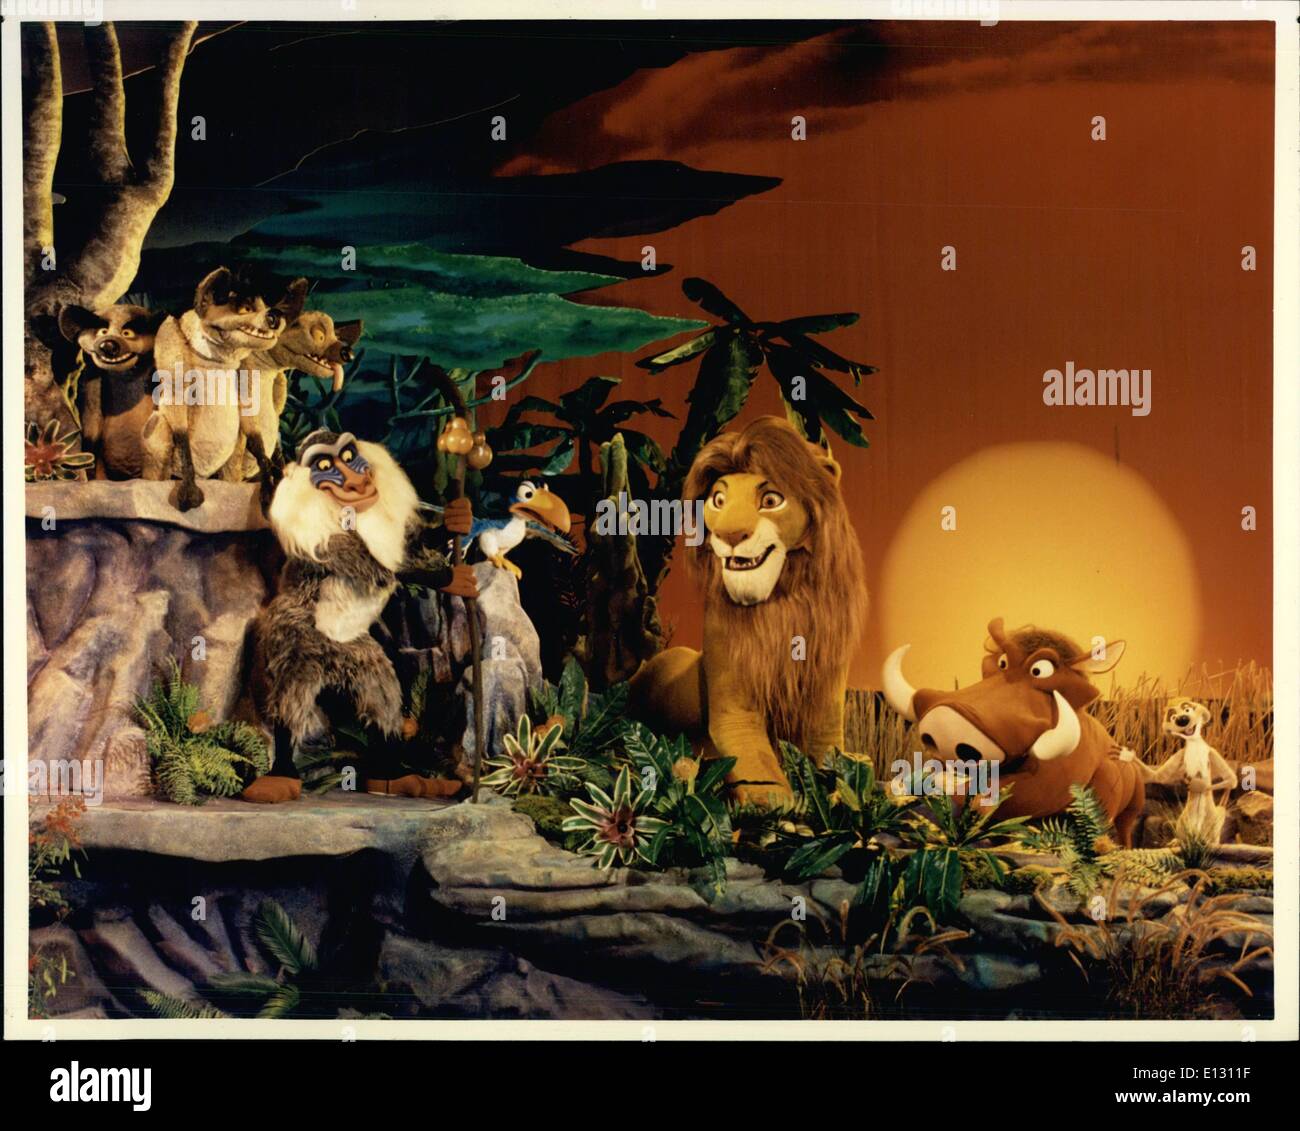 Feb. 26, 2012 - Lion King And His Cast Simba is joined by a host of characters who appear in ''The Legend of the Lion King'' stage show at the Magic Kingdom in the Walt Disney World Resort. The show features music and voices from the film in a three-dimensional extravaganza. Among Simba's supporting characters are Rafiki, the wise baboon; Zazu, a horn-bill and the king's advisor; whacky pals Timon and Pumbaa, a meerkat and warthog; and the nefarious trio of hyenas Shenzi, Banzai and Ed. Stock Photo